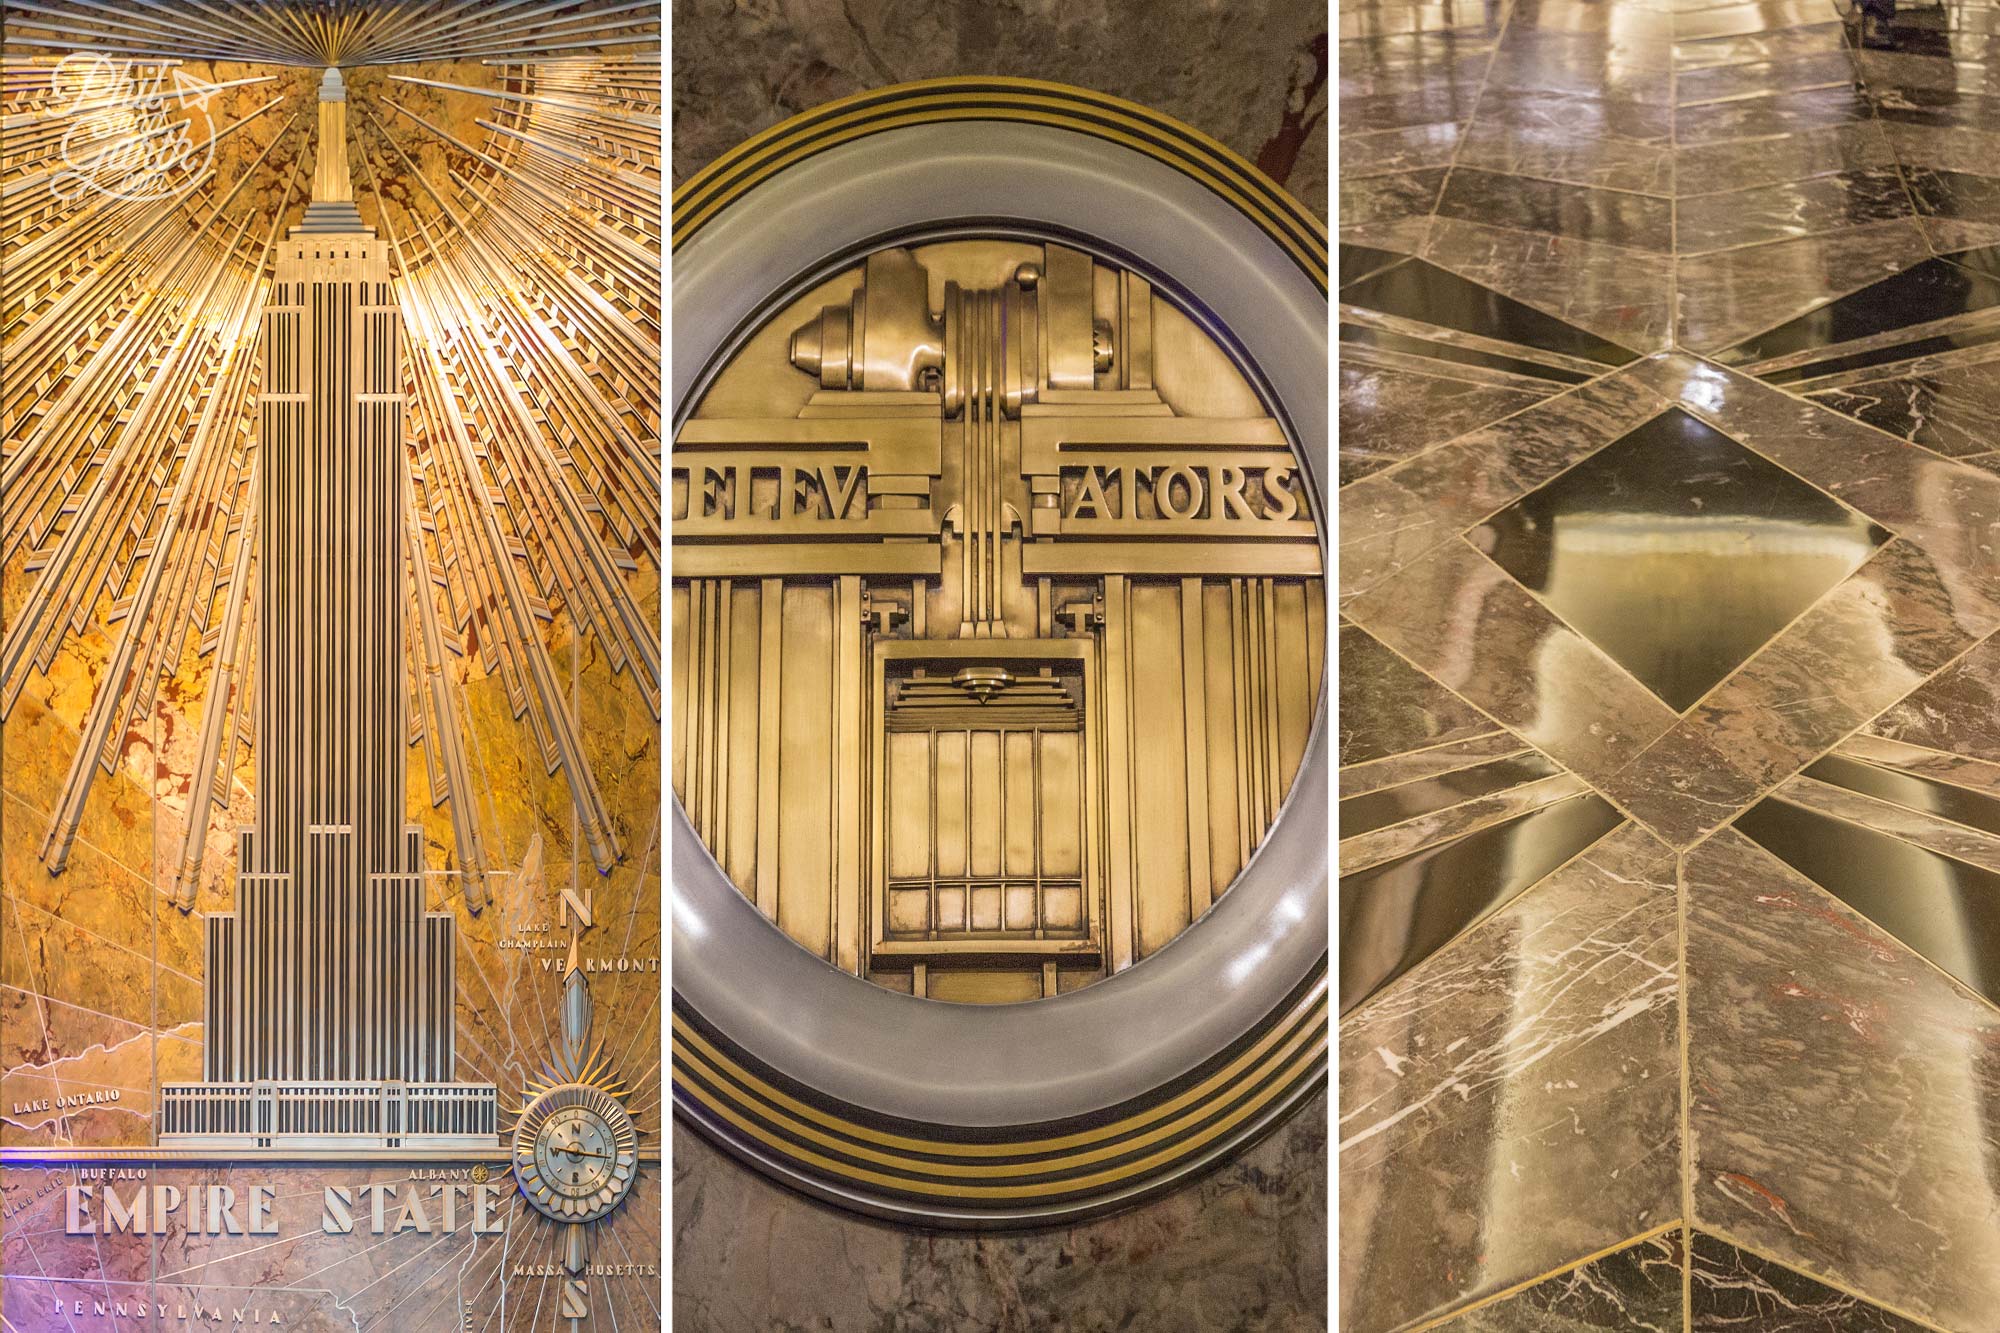 Magnificent 1930's Art Deco graphic designs inside the Empire State Building New York